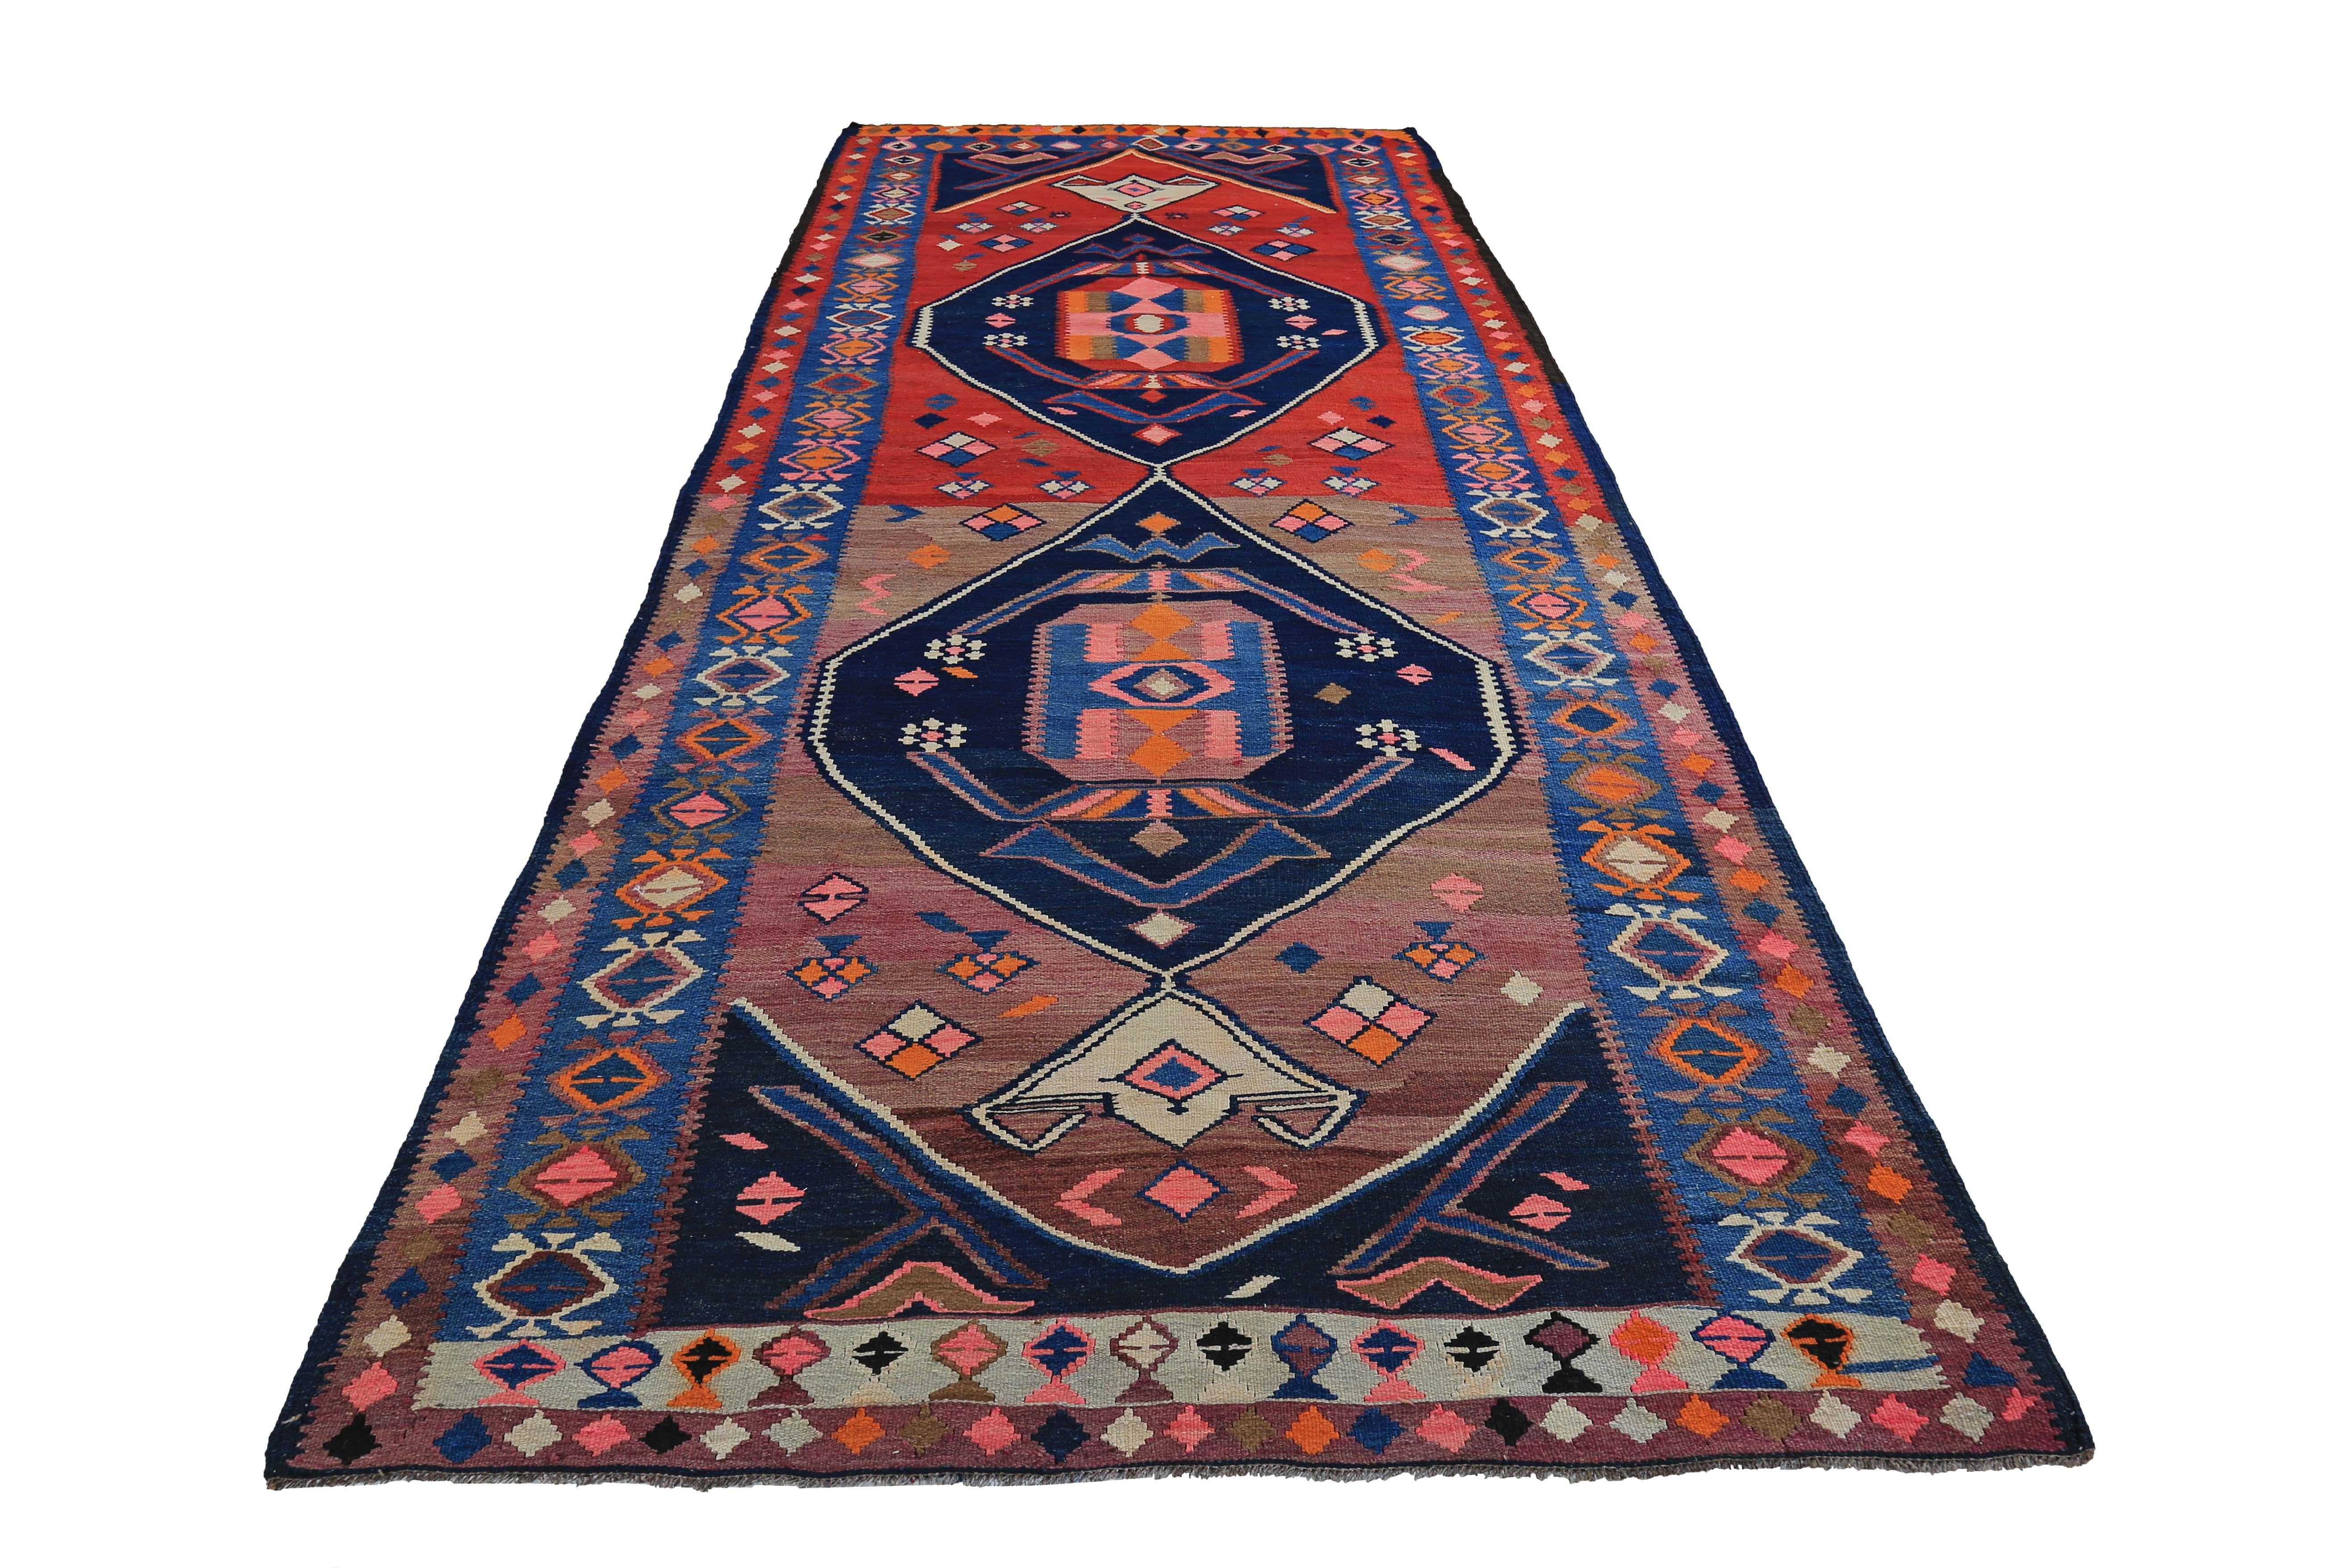 Turkish rug handwoven from the finest sheep’s wool and colored with all-natural vegetable dyes that are safe for humans and pets. It’s a traditional Kilim flat-weave design featuring blue, red and pink tribal designs. It’s a stunning piece to get